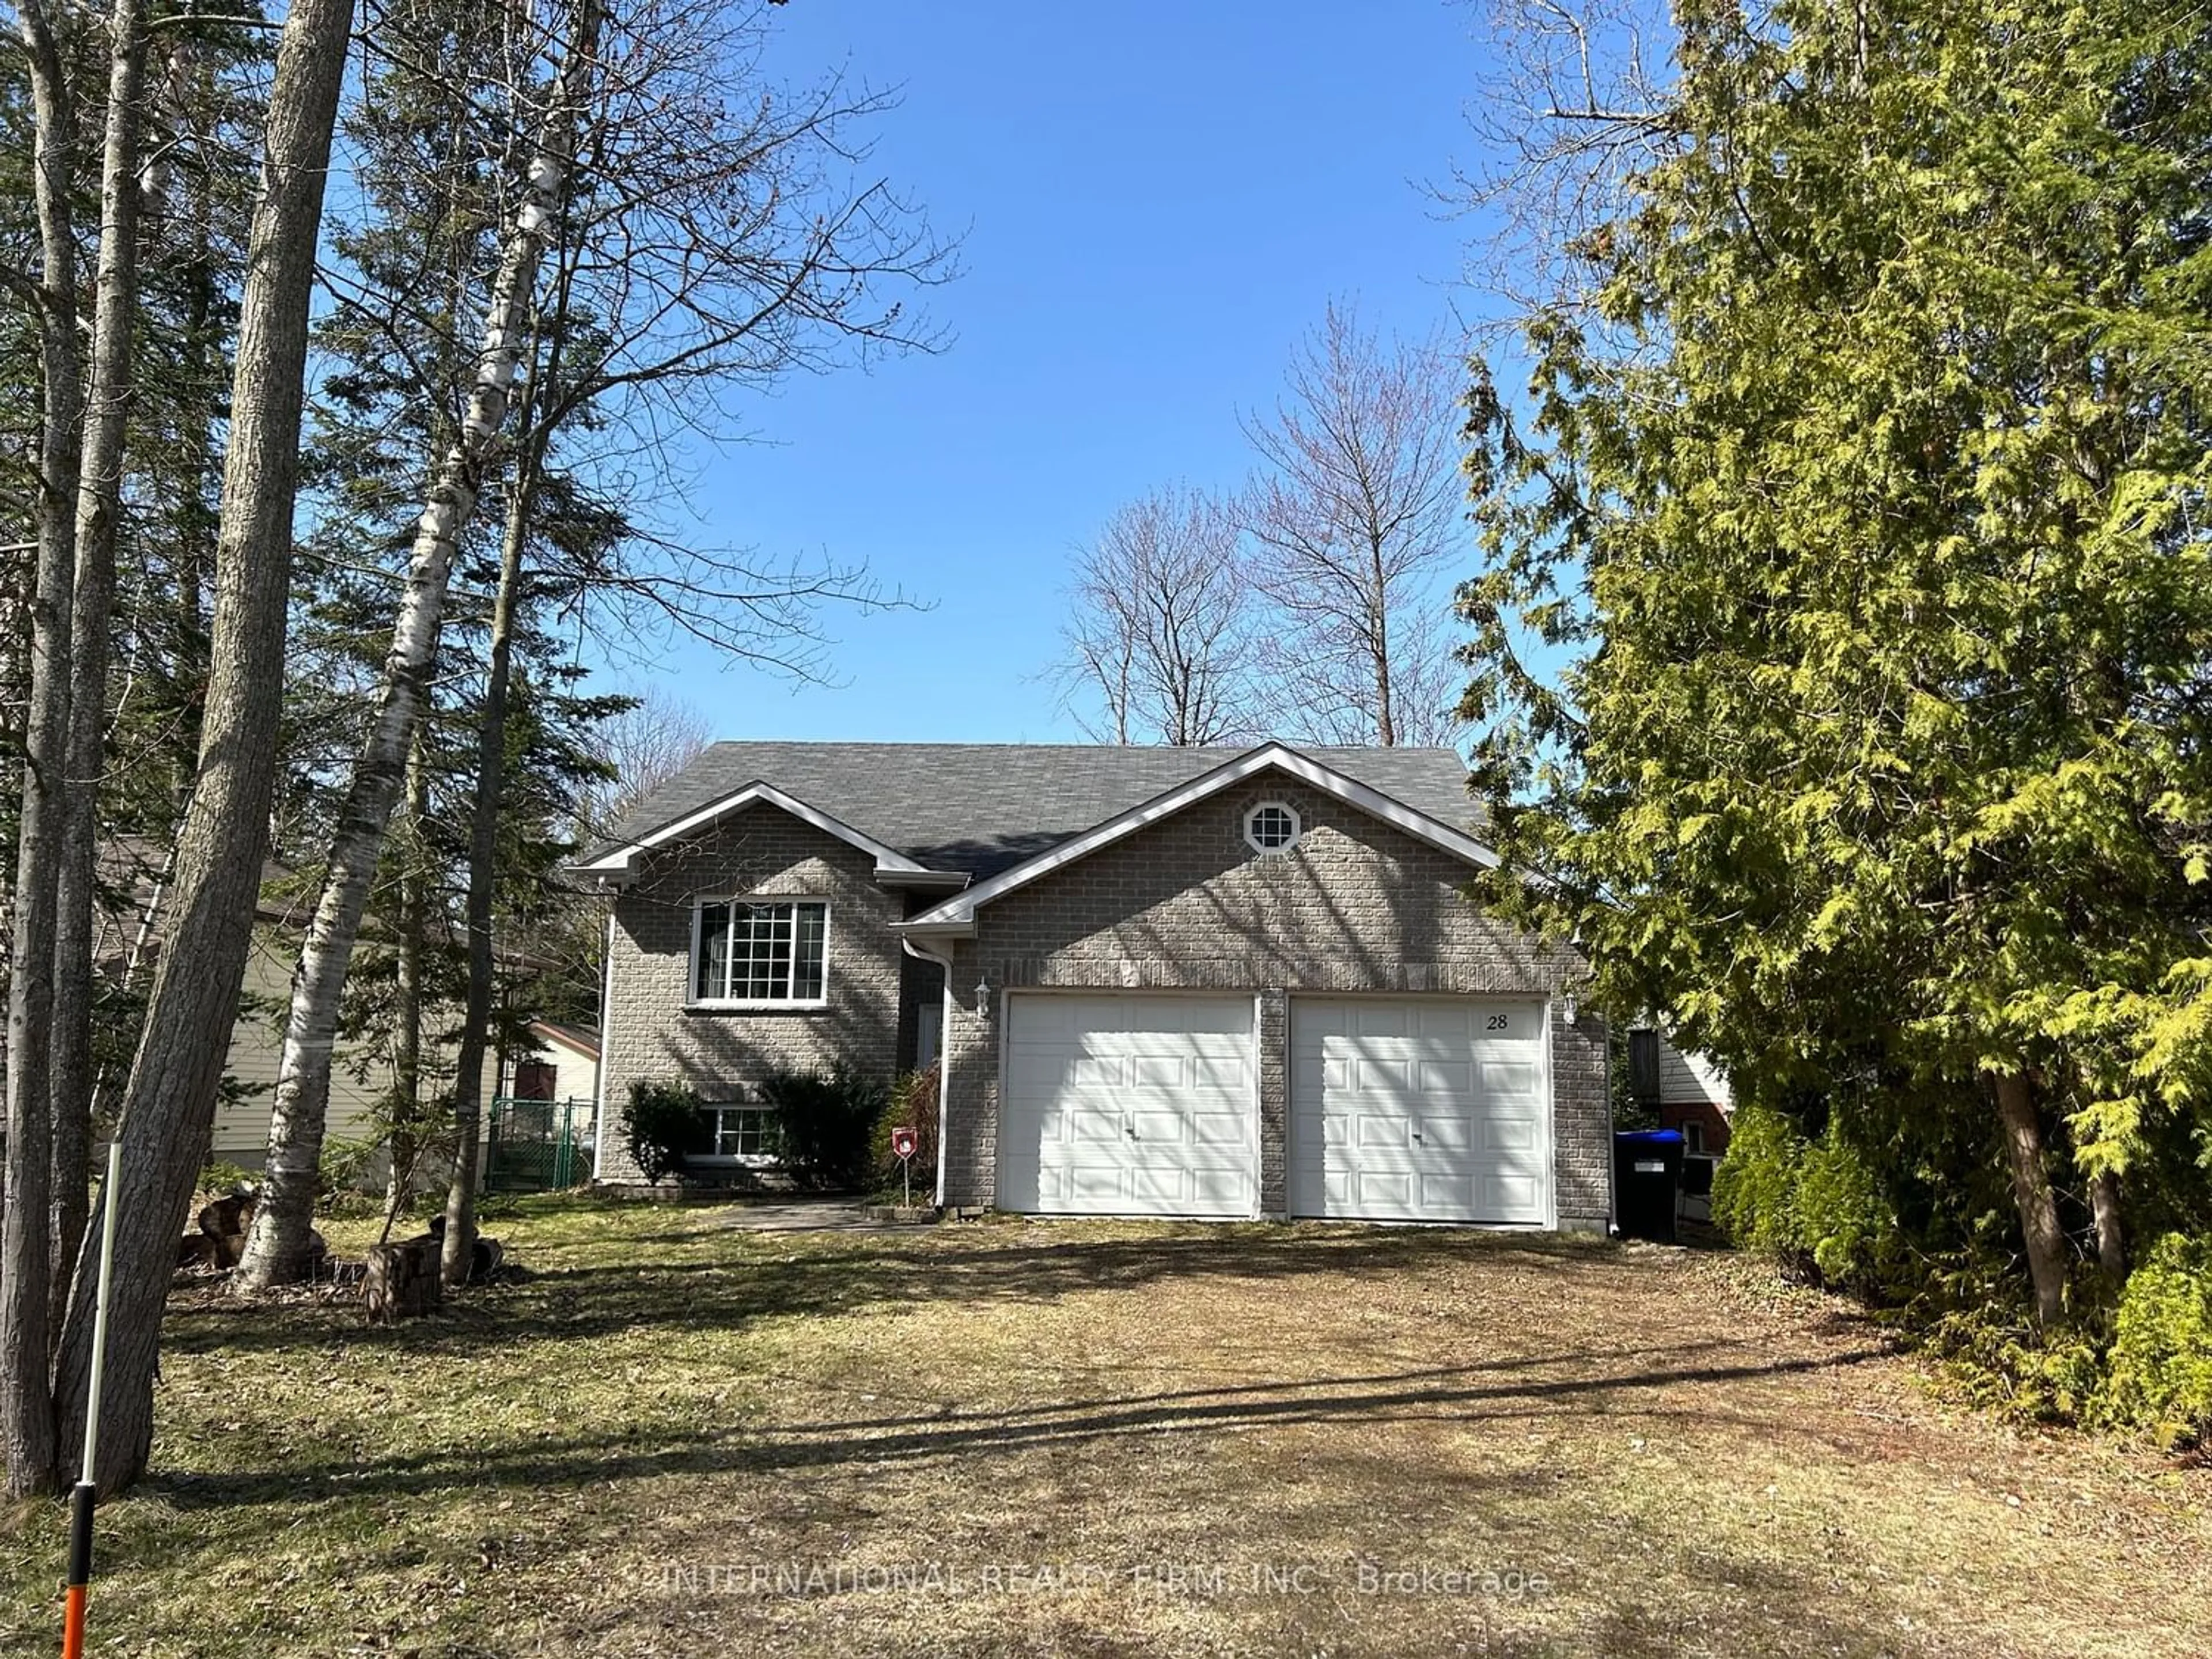 Frontside or backside of a home for 28 55th St, Wasaga Beach Ontario L9Z 1W9